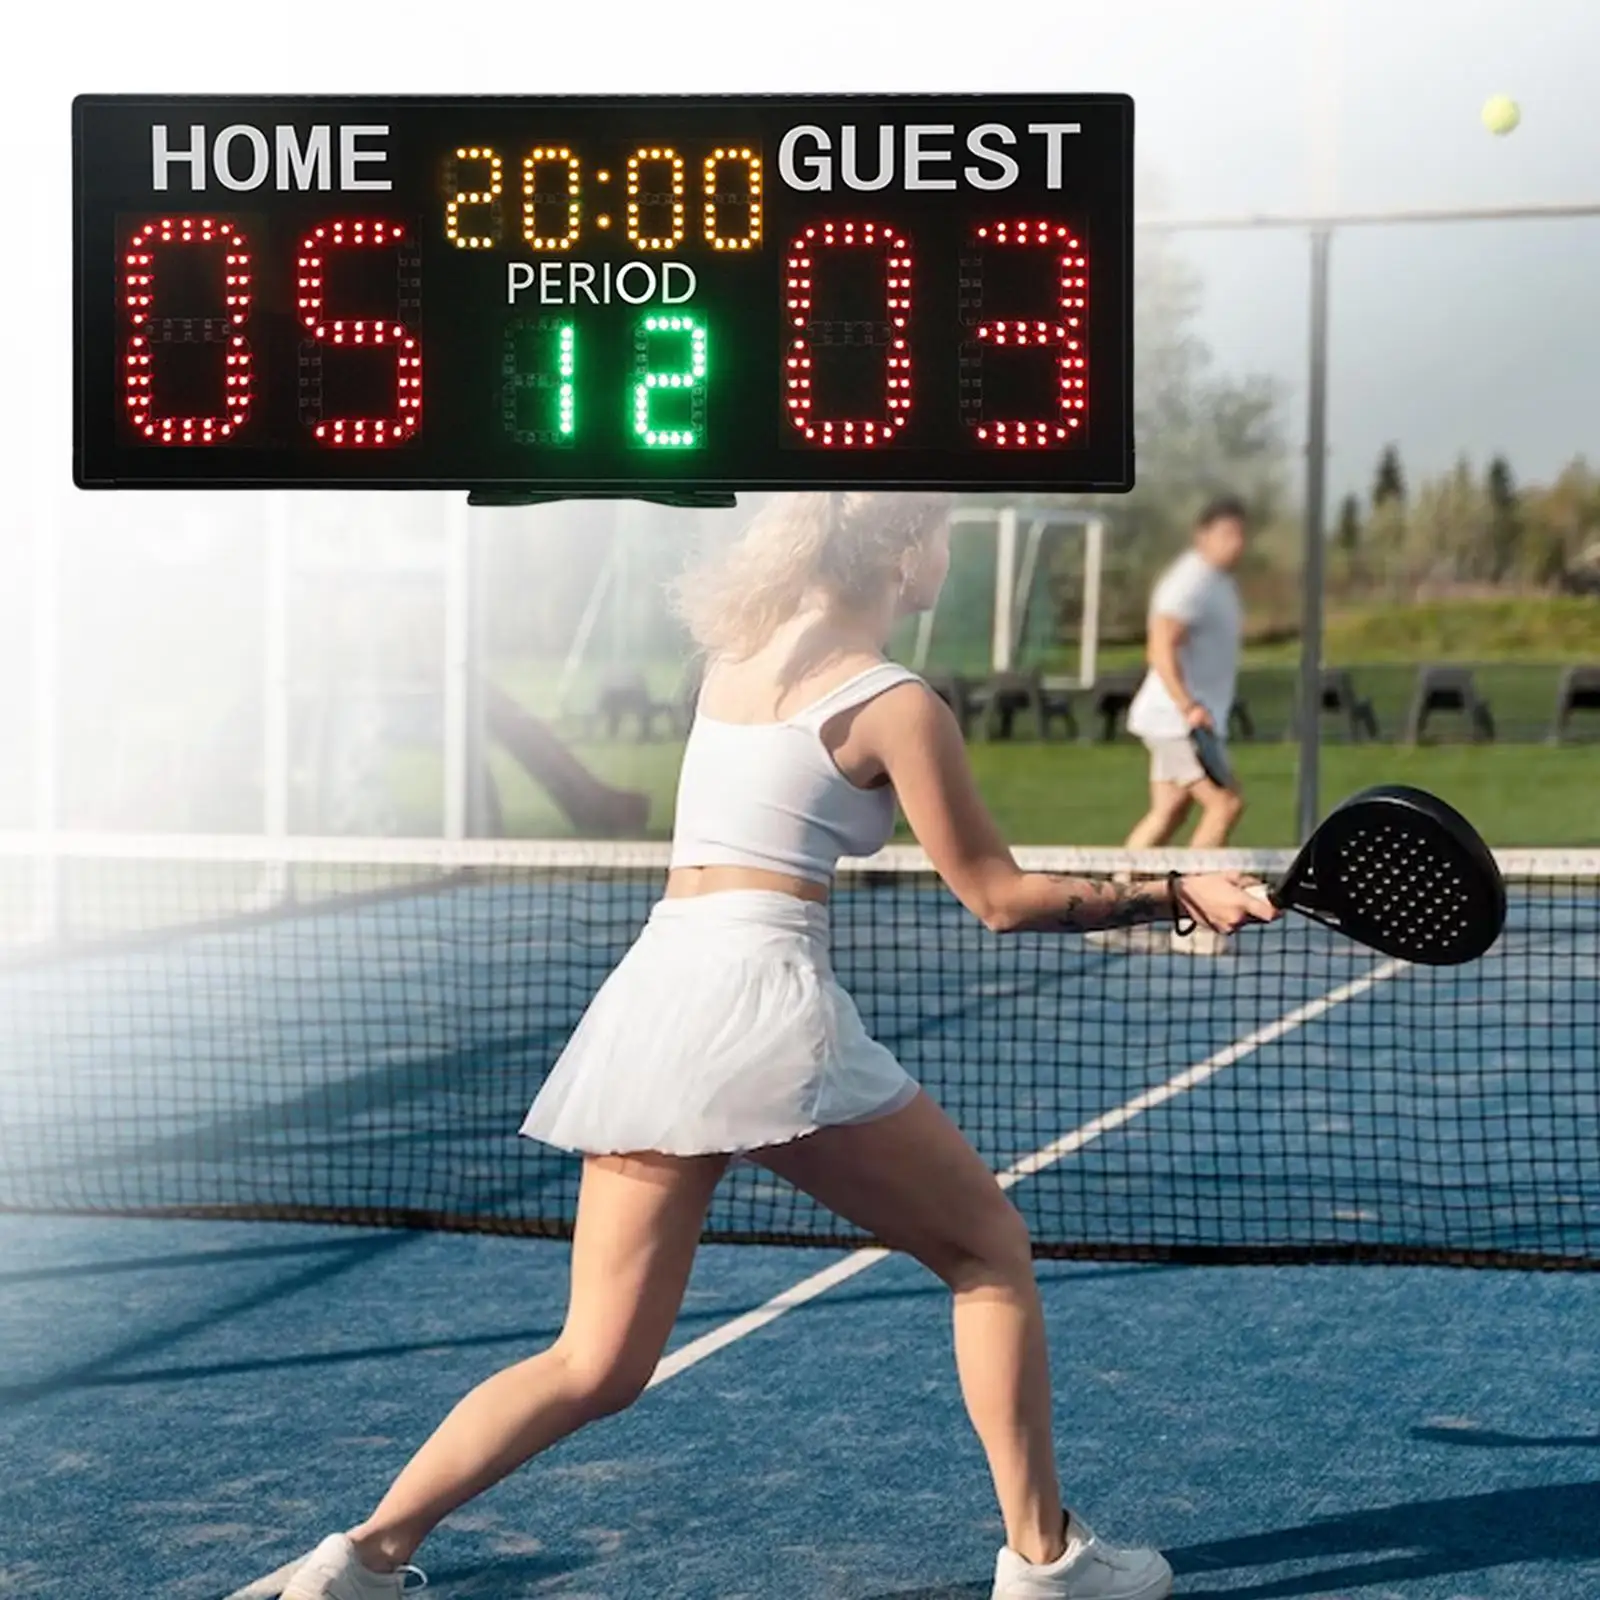 Tennis Score Keeper Professional Electronic Scoreboard Portable Score Clock for Baseball Soccer Volleyball Games Outdoor